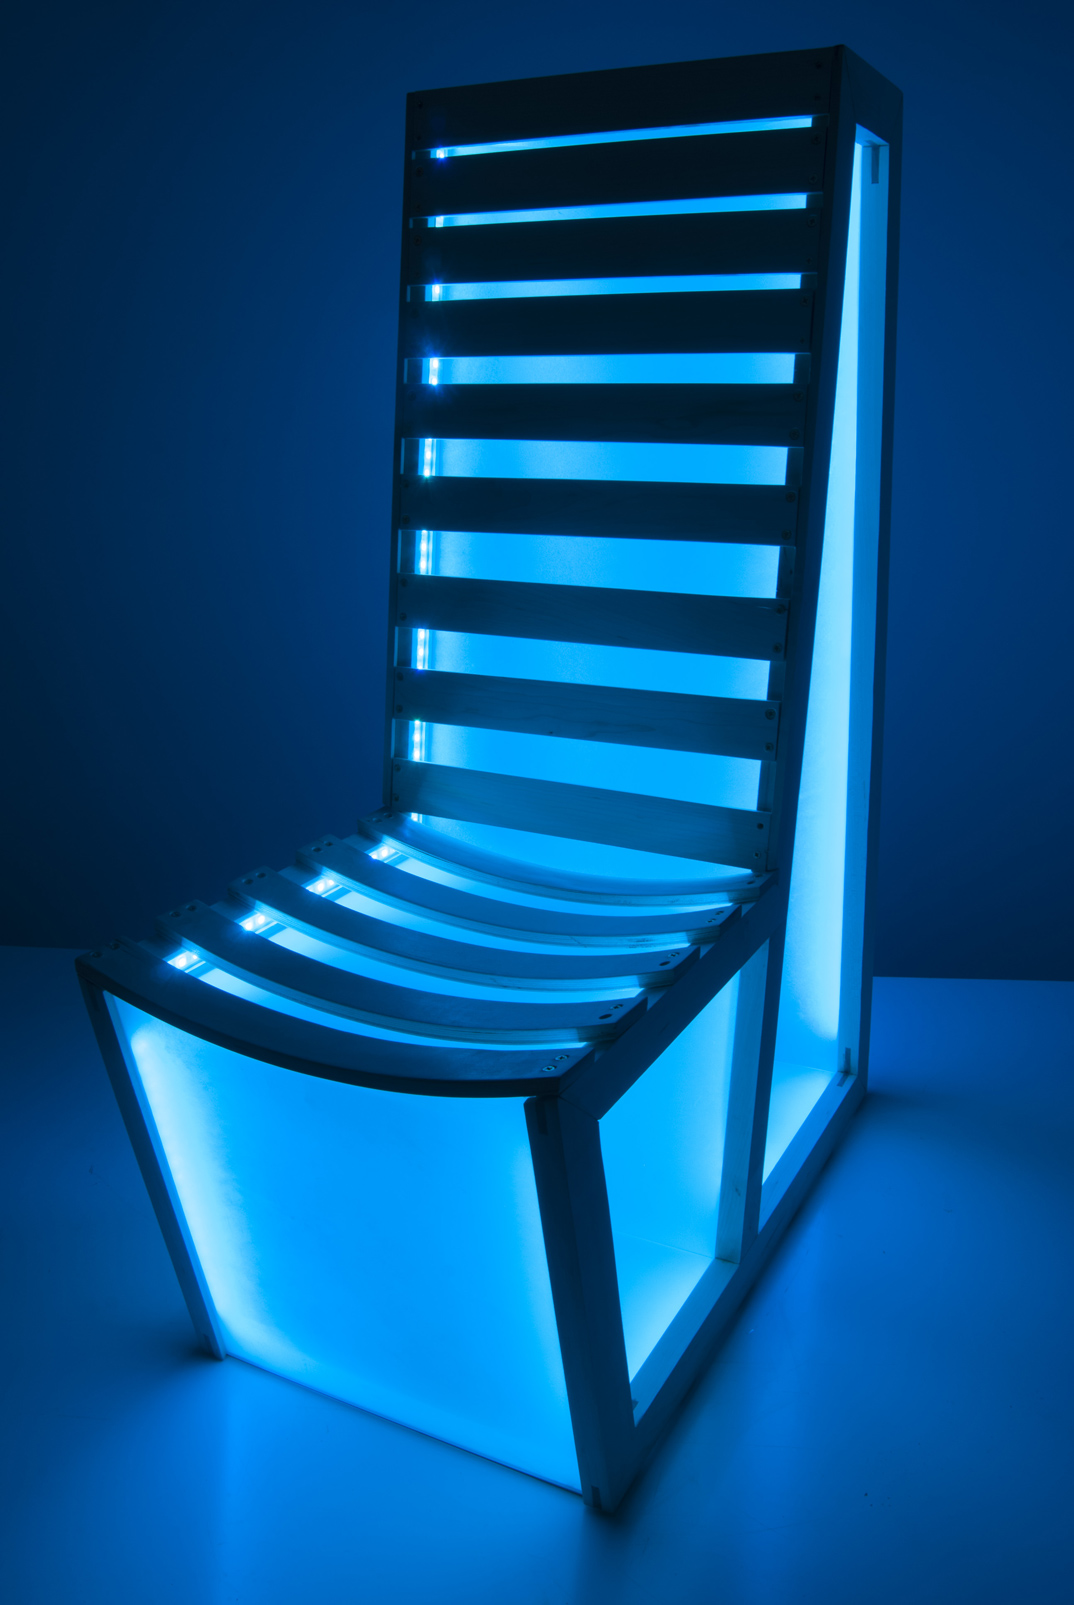 “LED Music Chair,” a Best in Show award-winner by senior art/fine arts major Cecilia A. Lemus of New Albany is among 60 student creations that were recently featured in the Mississippi State University Department of Art’s 45th Student Juried Exhibition. (Submitted photo by Cecilia Lemus)